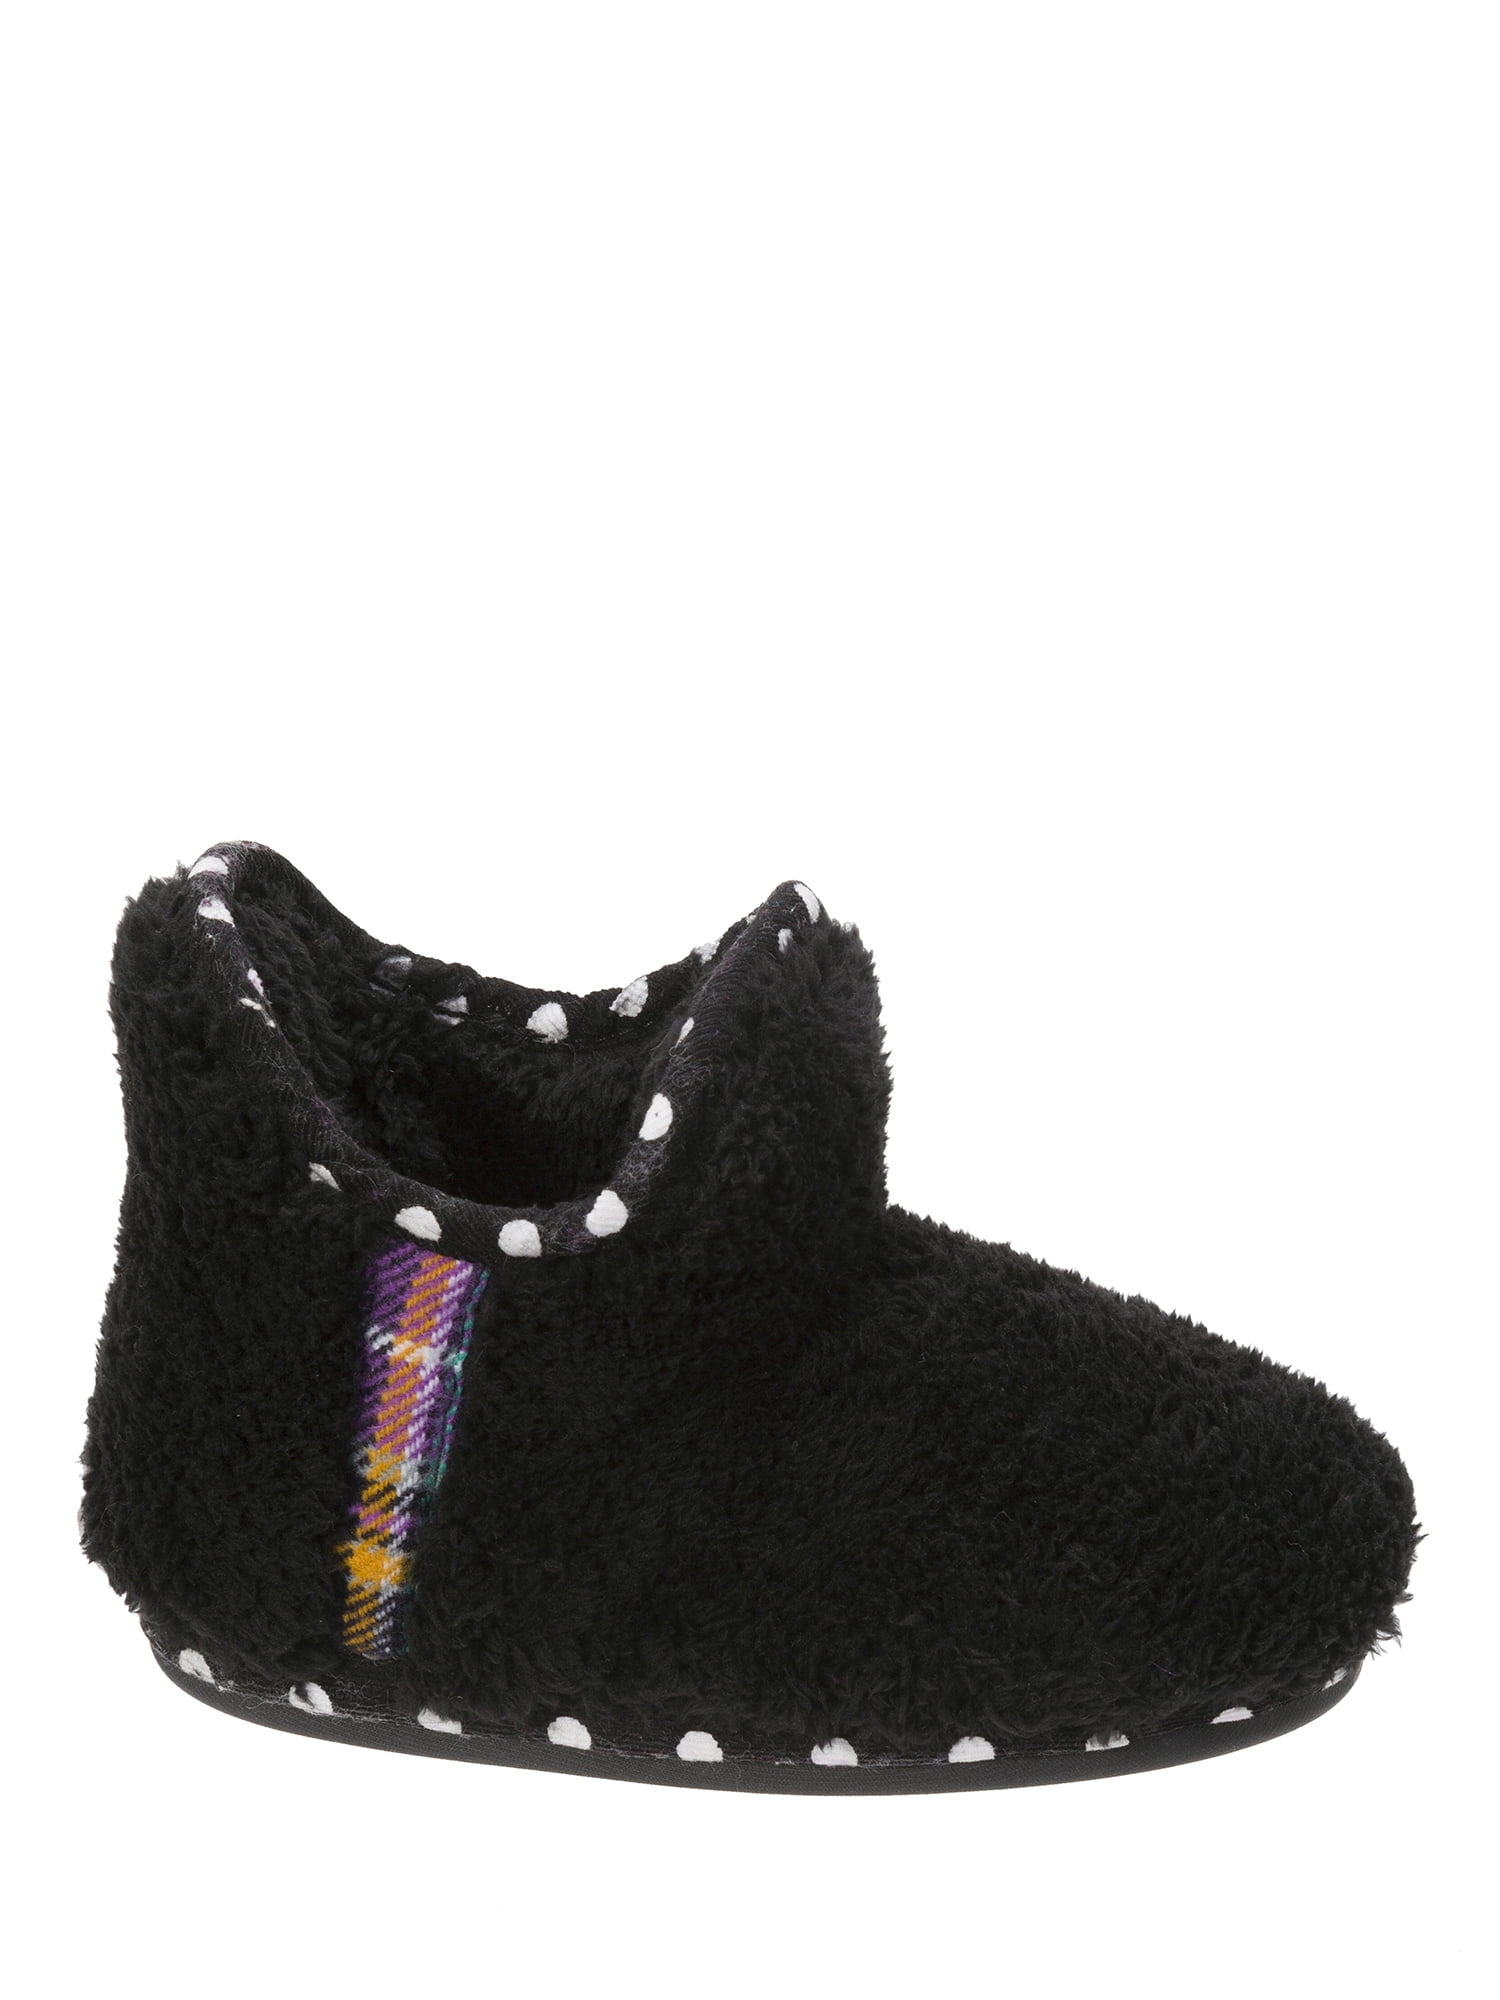 Dearfoams Kids Pile Bootie with Mixed Material Trim Slipper 